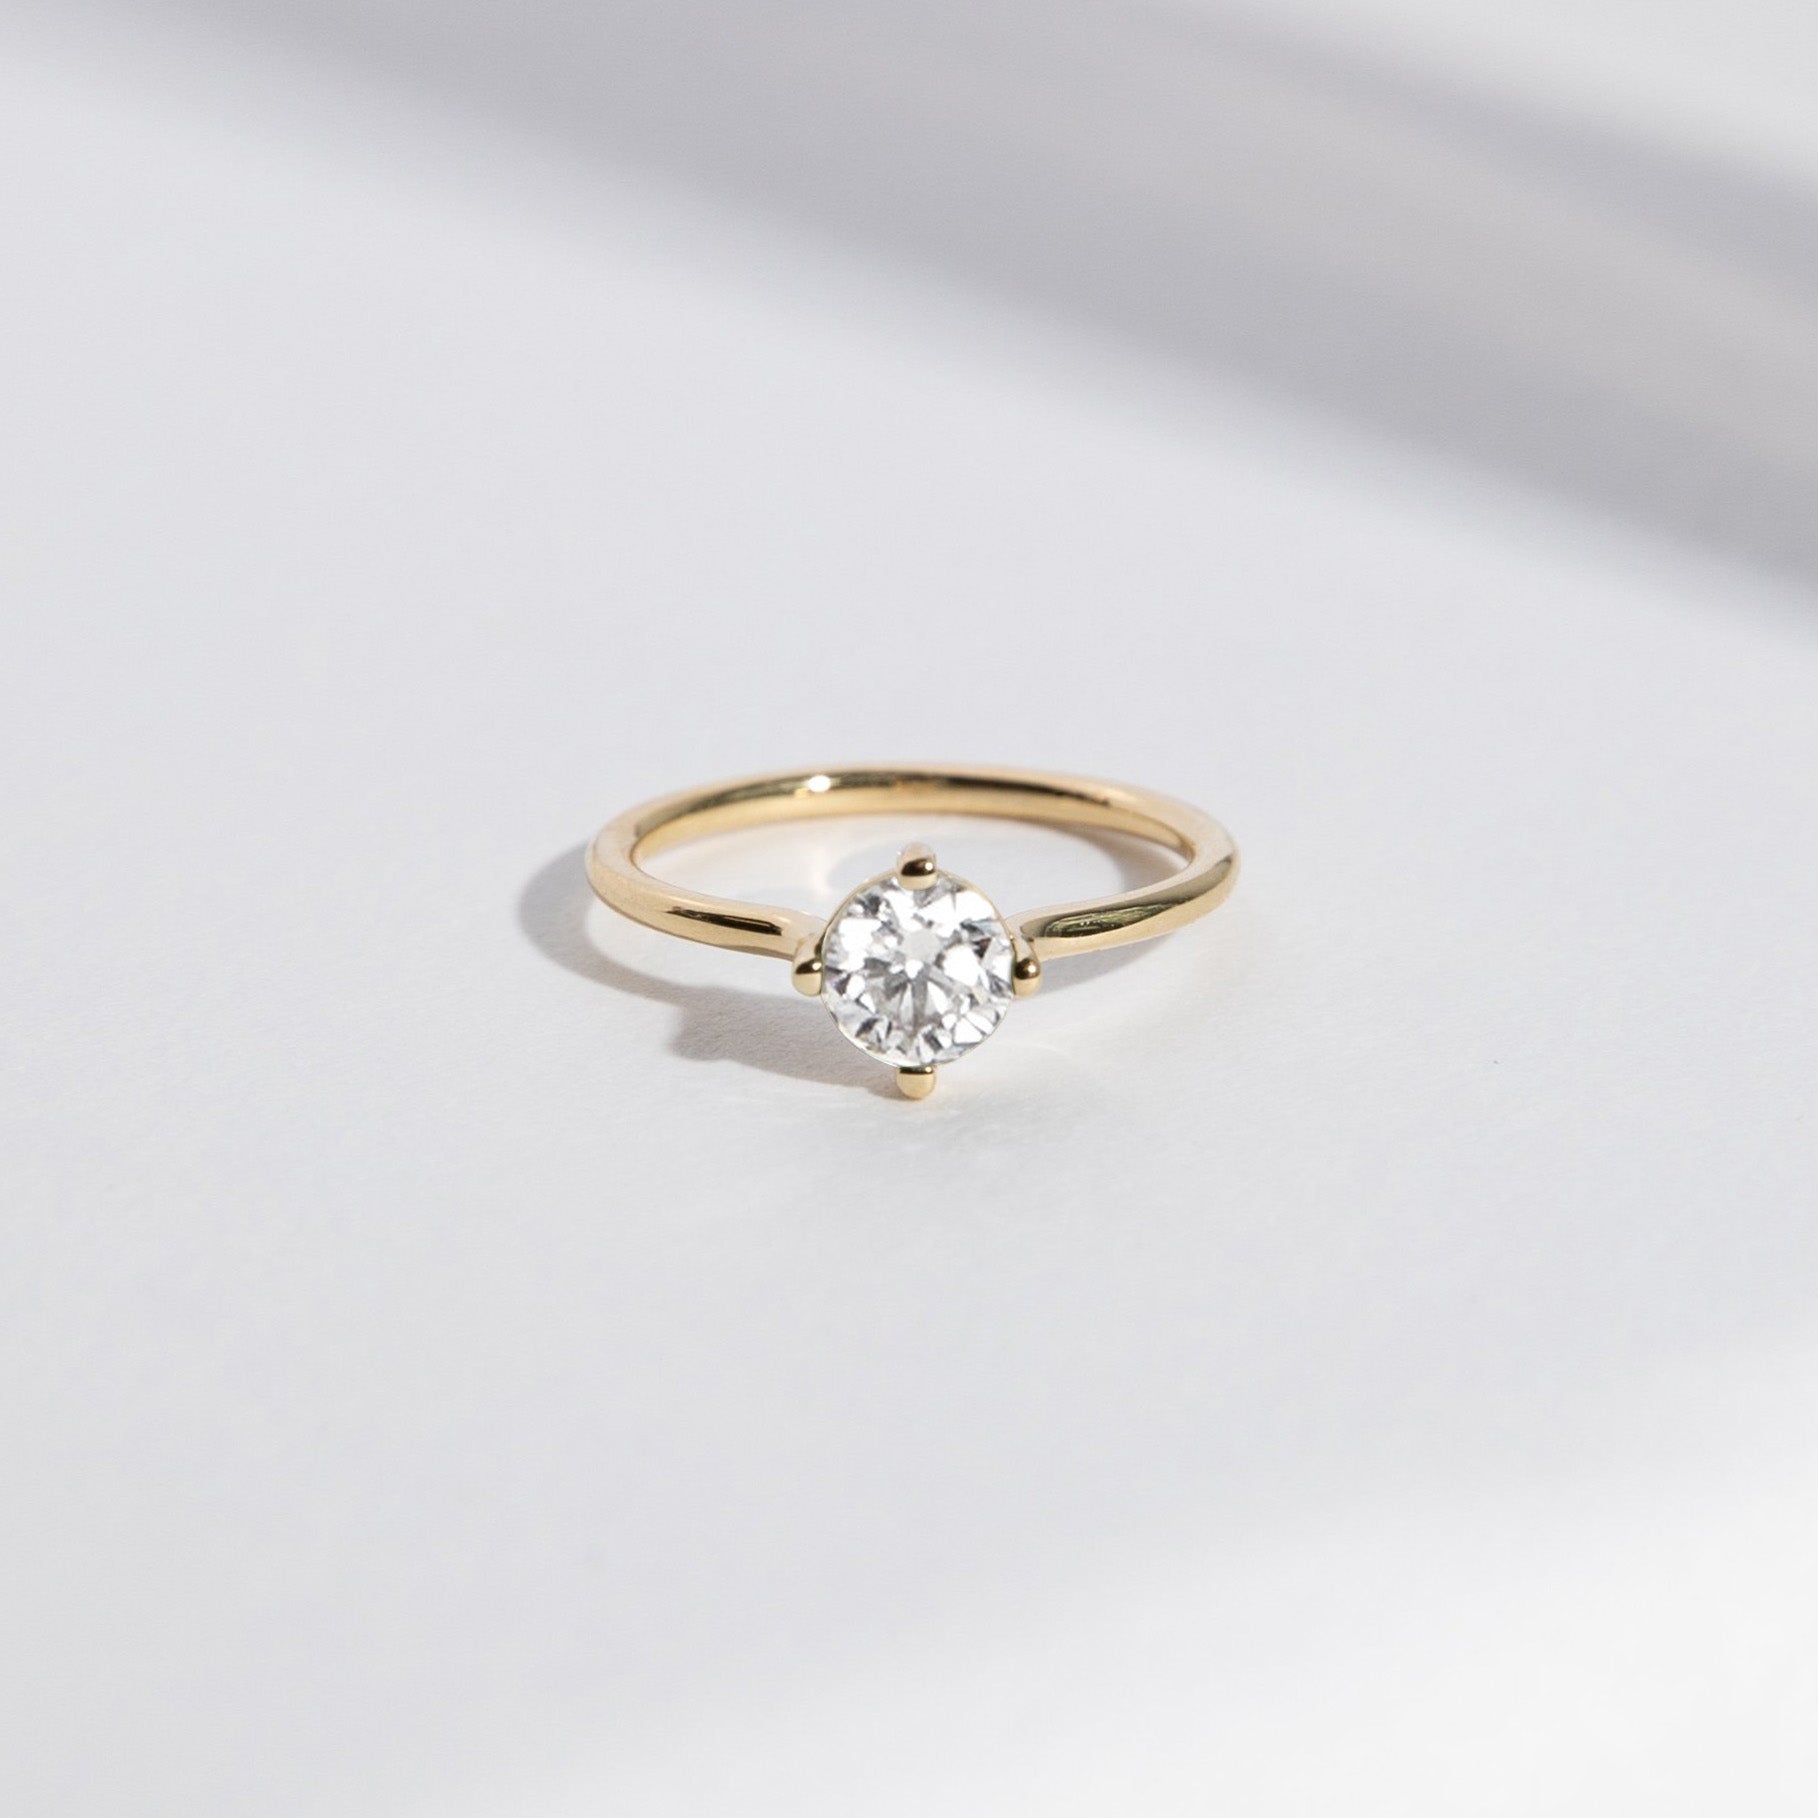 Velu Thin Ring in 14k Gold set with a round brilliant cut lab-grown diamond By SHW Fine Jewelry NYC